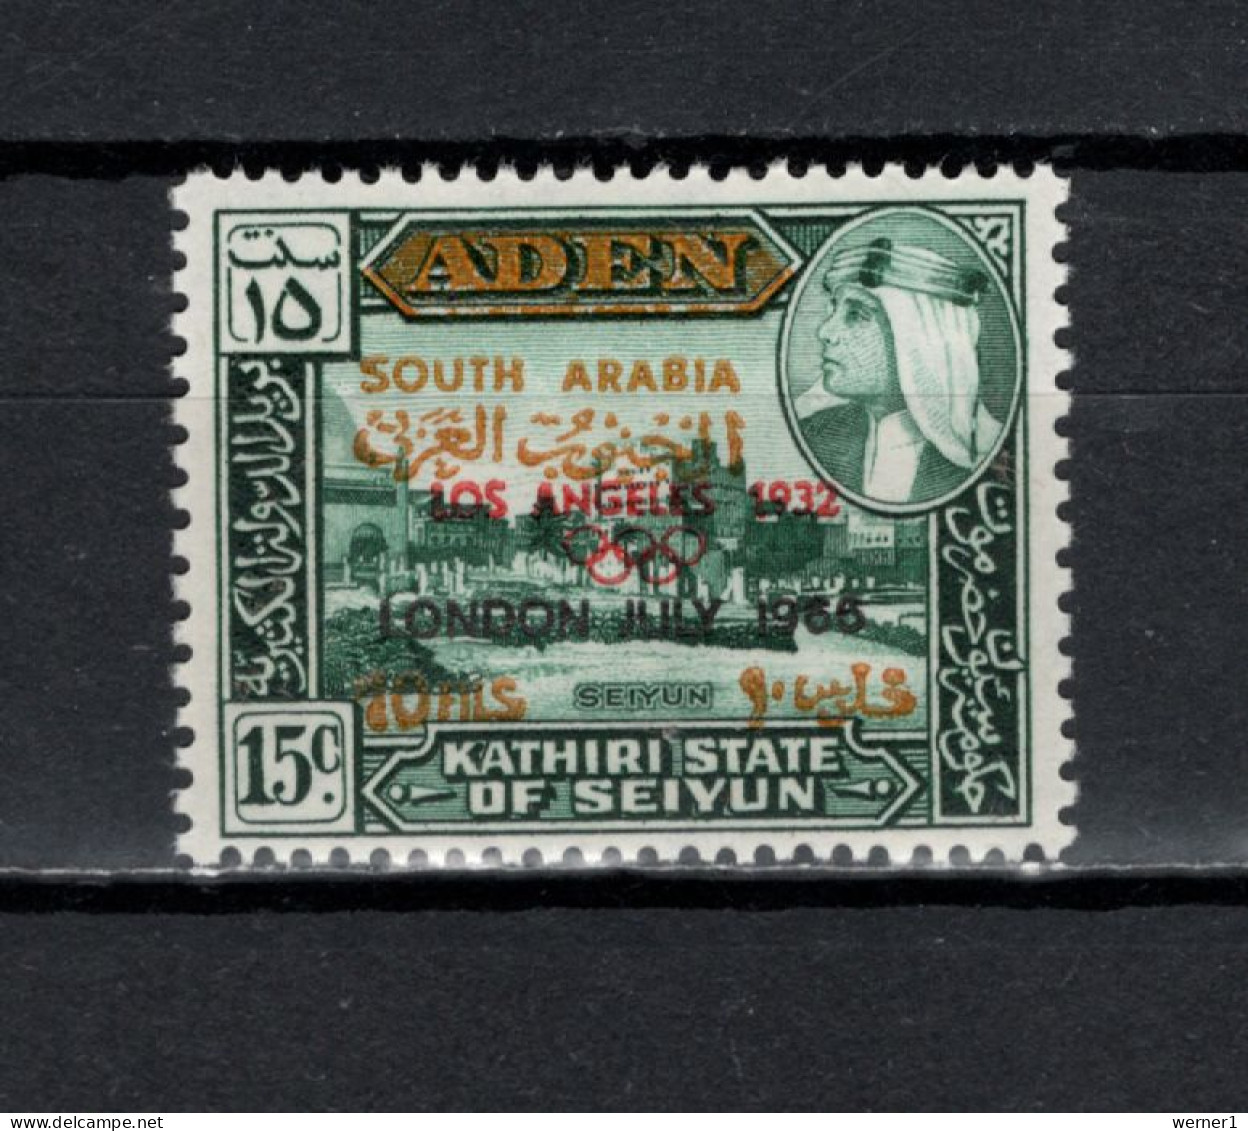 Aden - Kathiri State Of Seiyun 1966 Football Soccer World Cup Stamp With Black O/p "LONDON JULY 1966" MNH -scarce- - 1966 – England